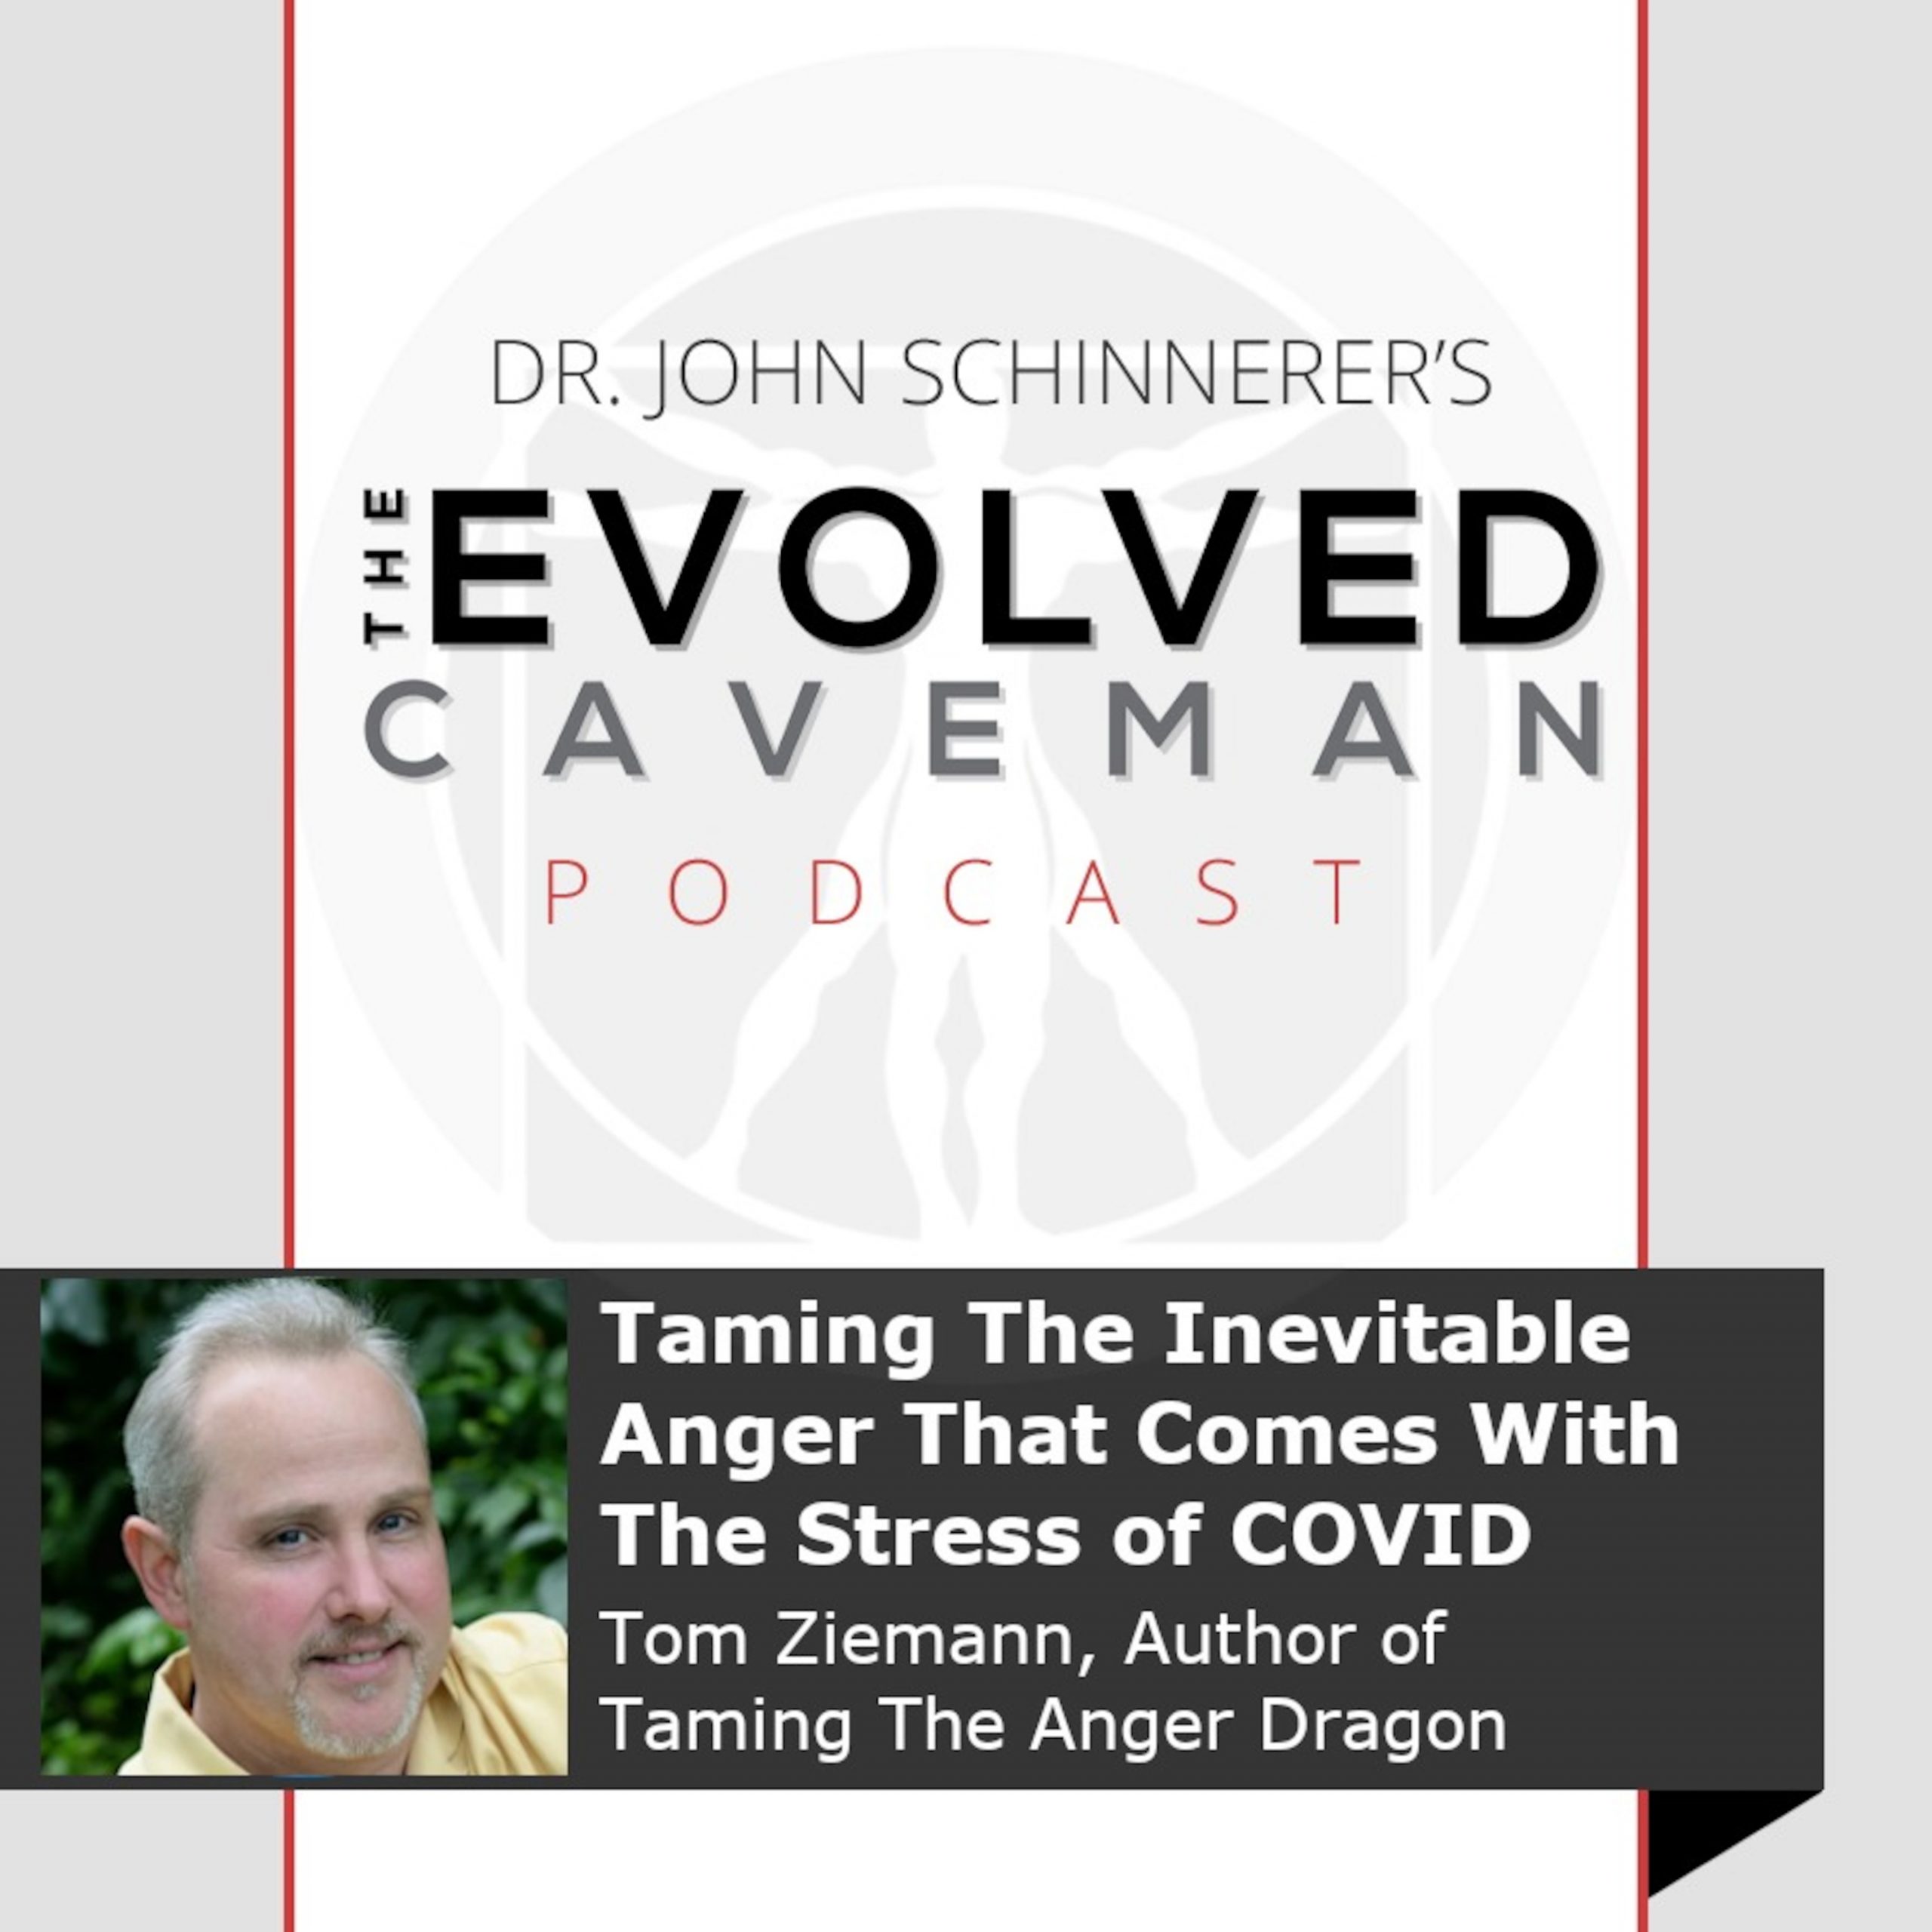 Episode 88: Taming The Anger And Irritability That Comes With COVID